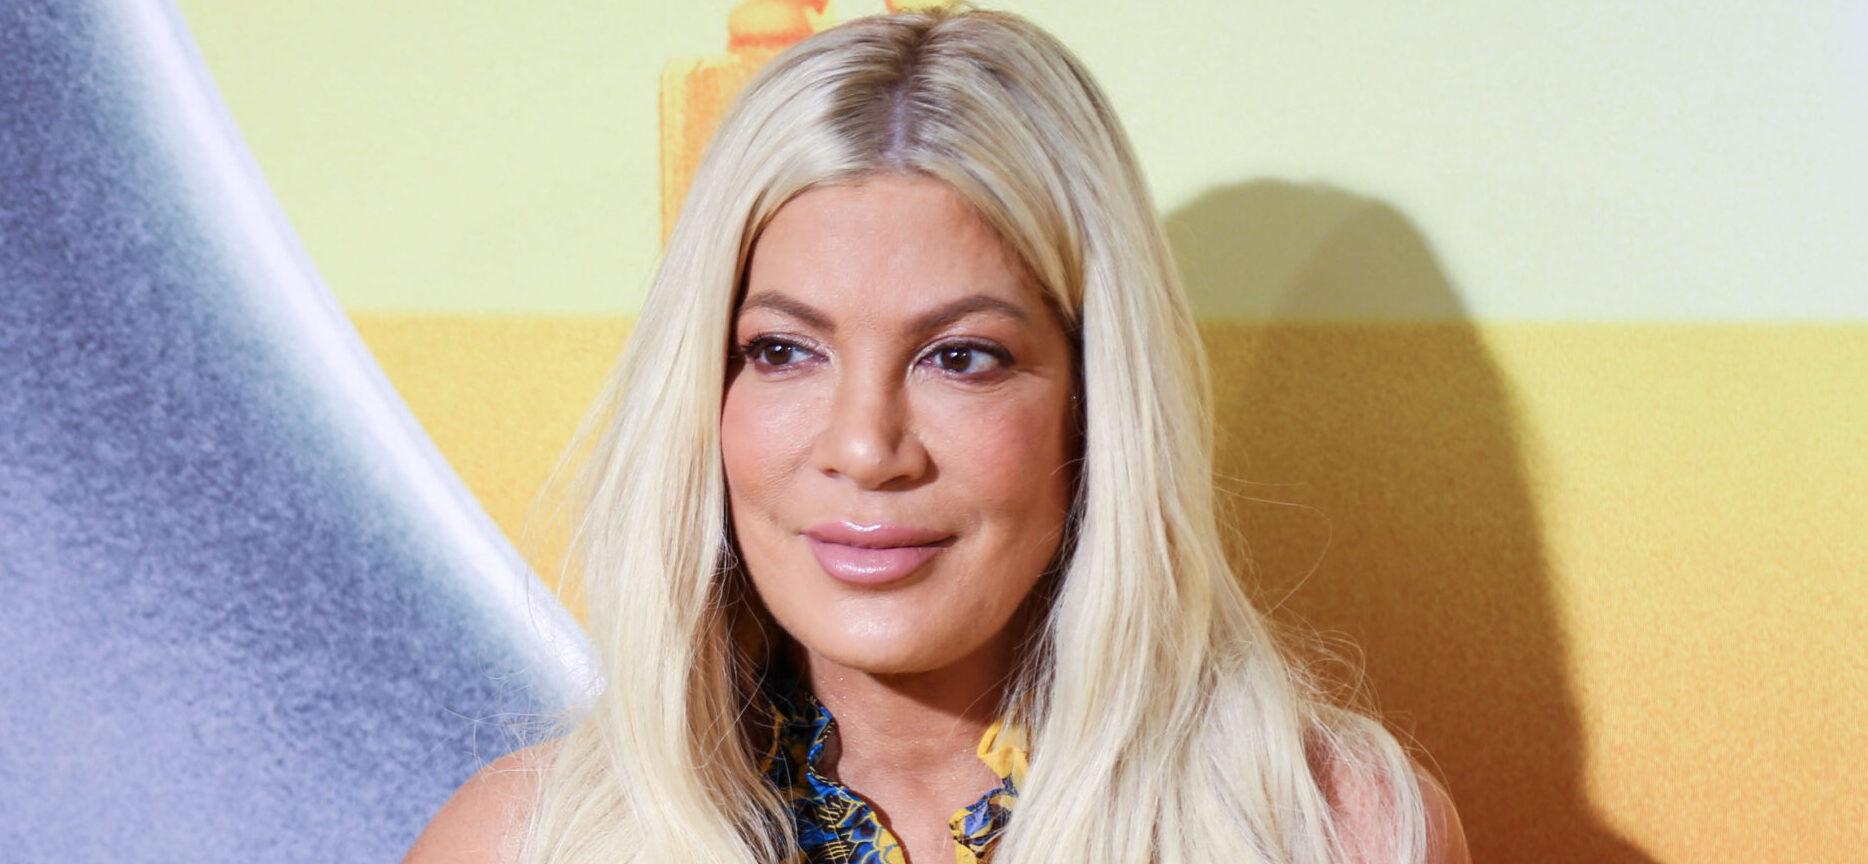 Tori Spelling Called ‘Gross’ For Saying She Once Peed In Her Son’s Diaper While Stuck In Traffic